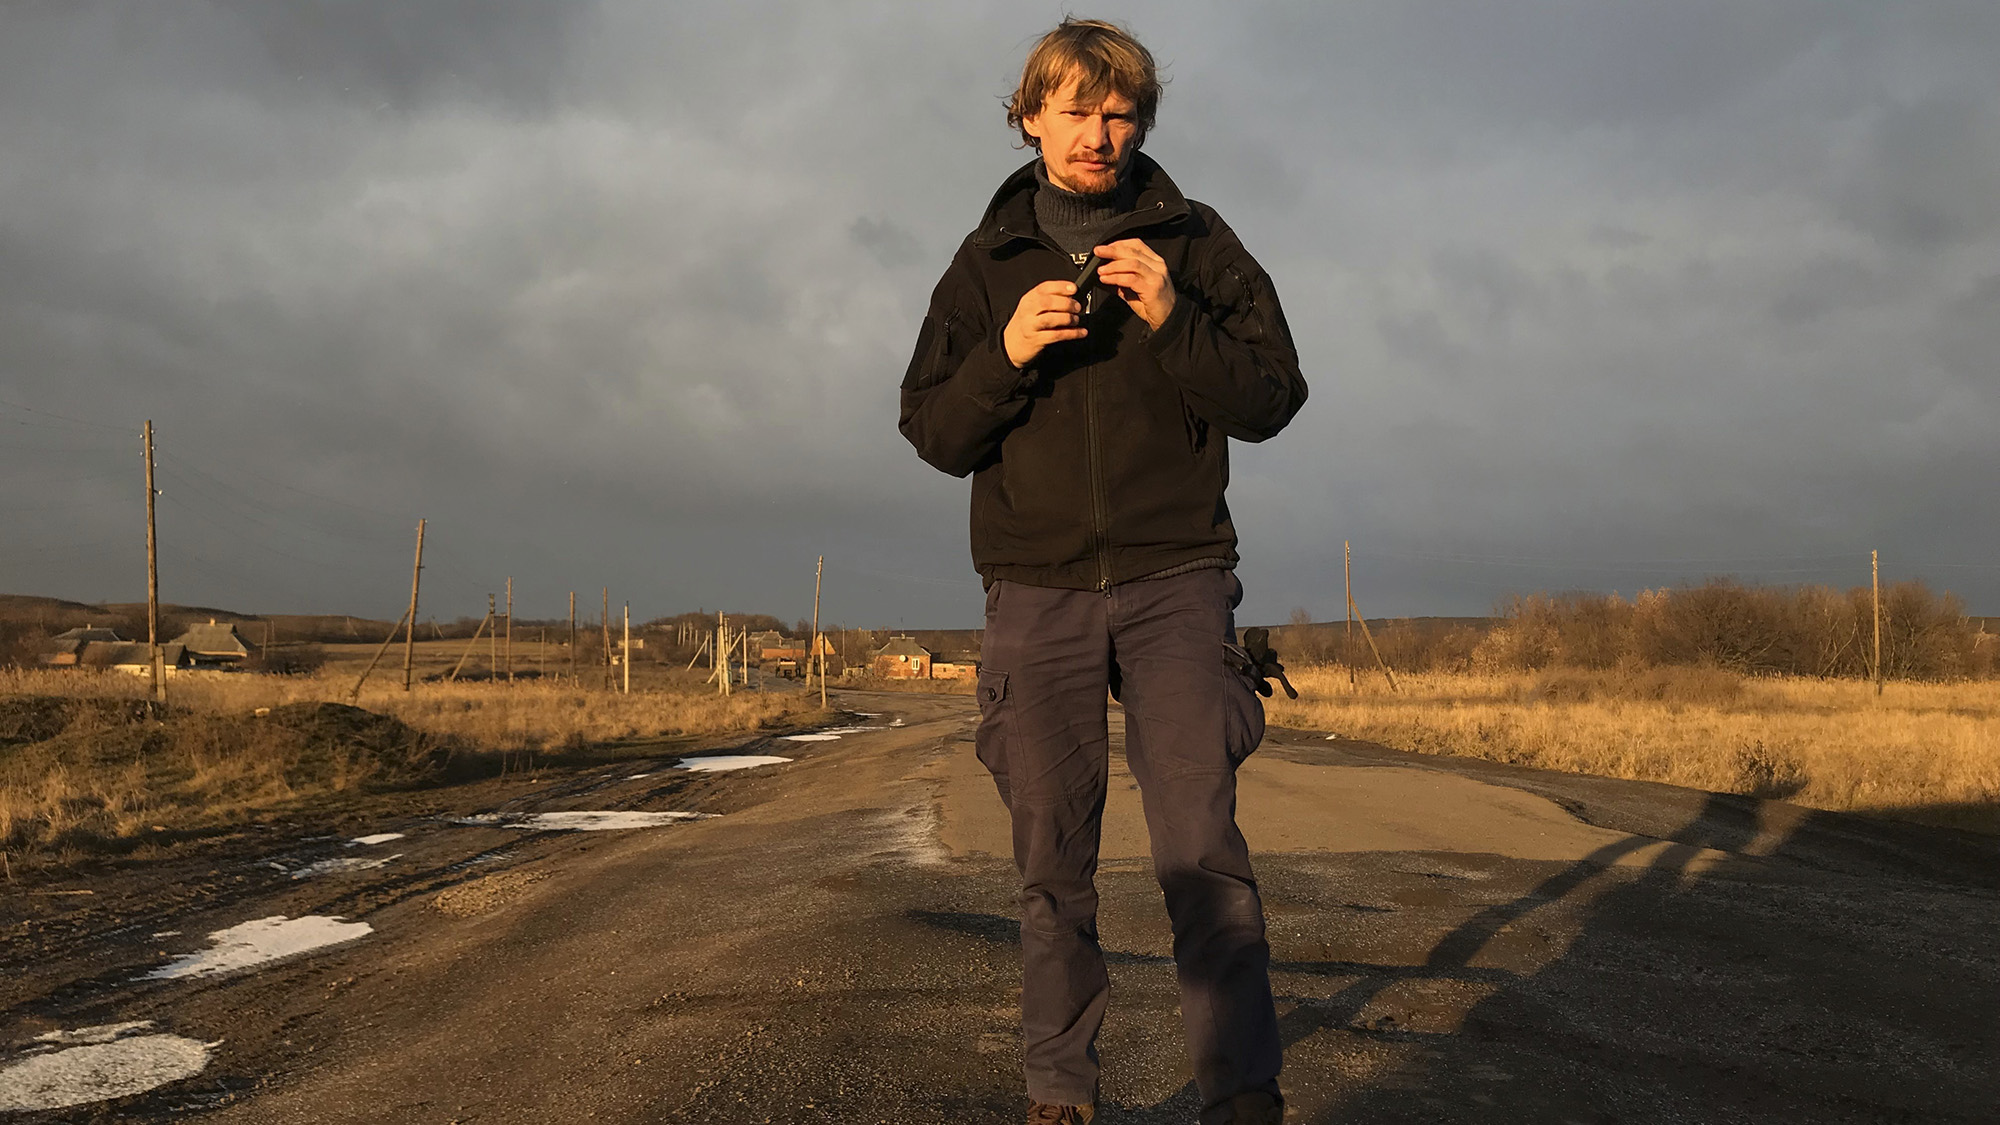 Ukrainian photojournalist Max Levin poses for a photo in the Donetsk region in Ukraine on Jan. 12, 2018. The UNIAN news agency reported Tuesday March 22, that Levin has been unaccounted since March 13.